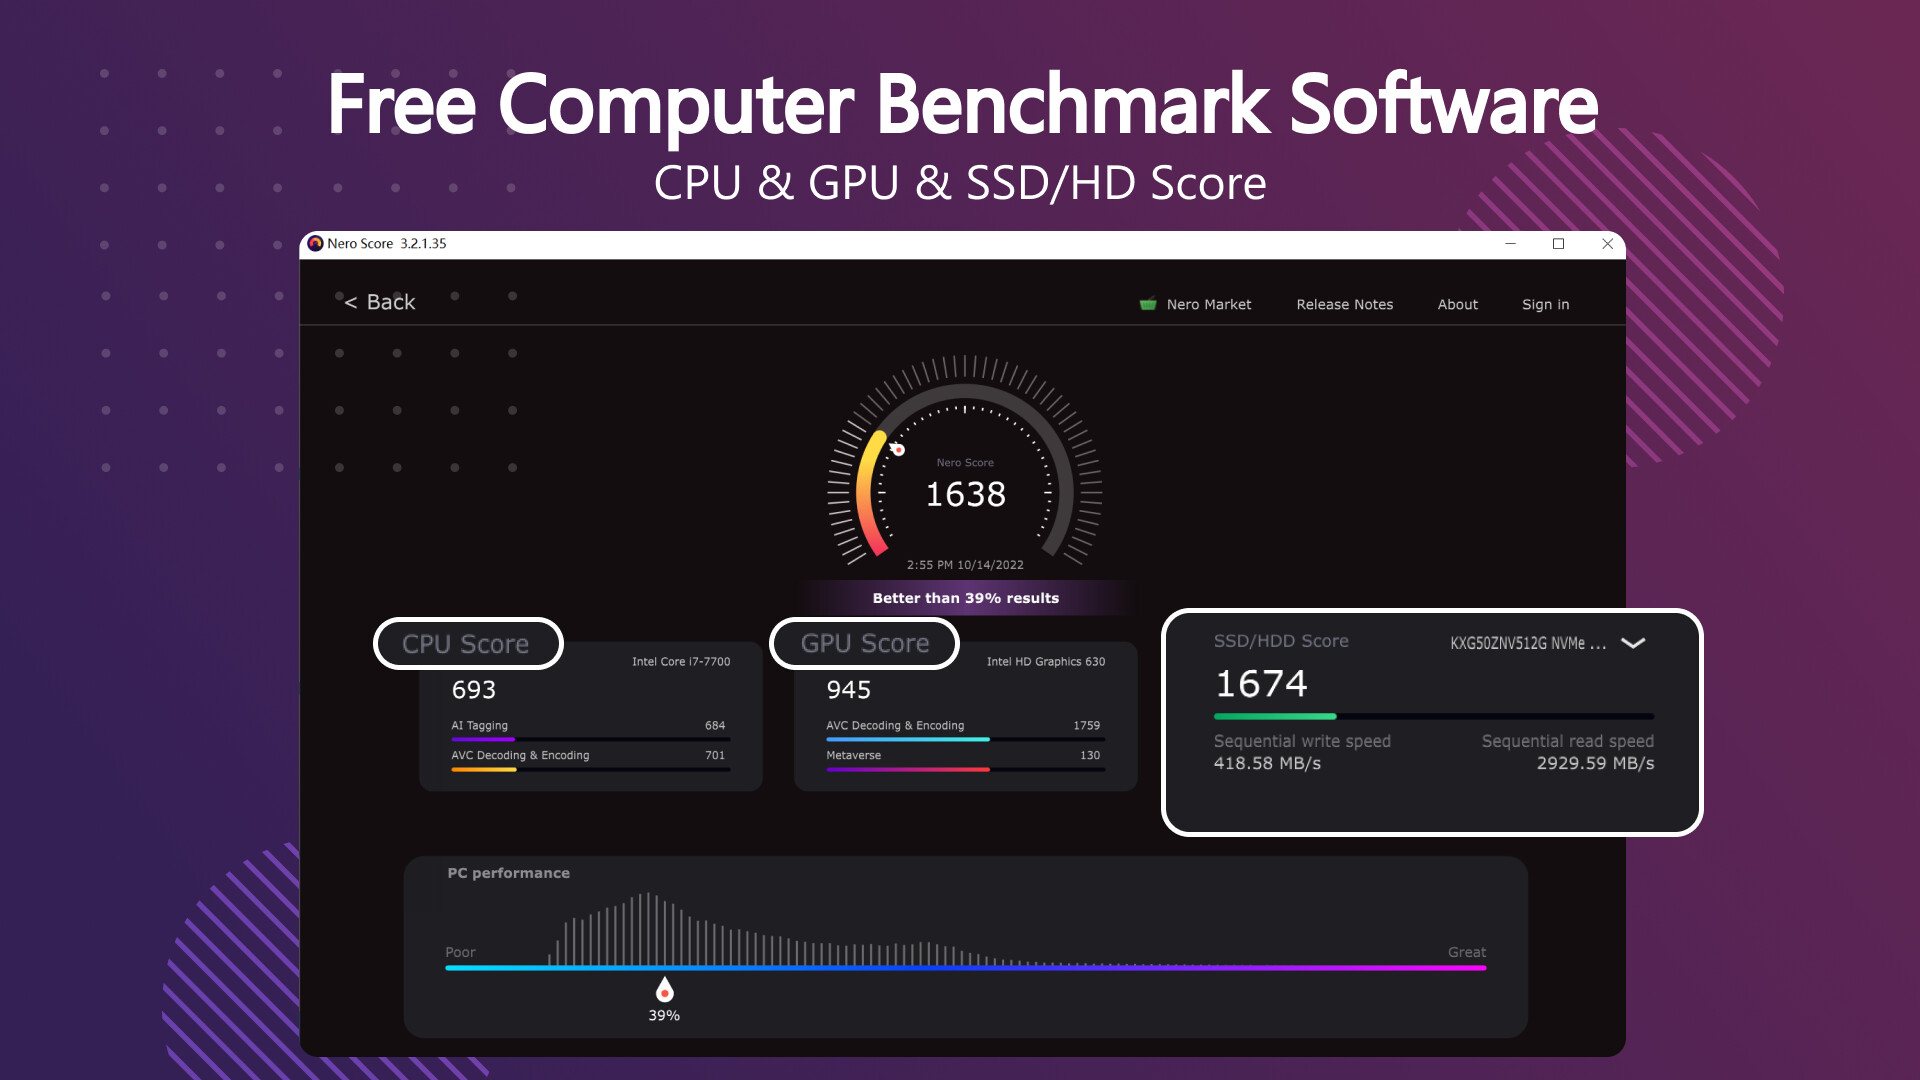 The best CPU benchmarking software for 2022